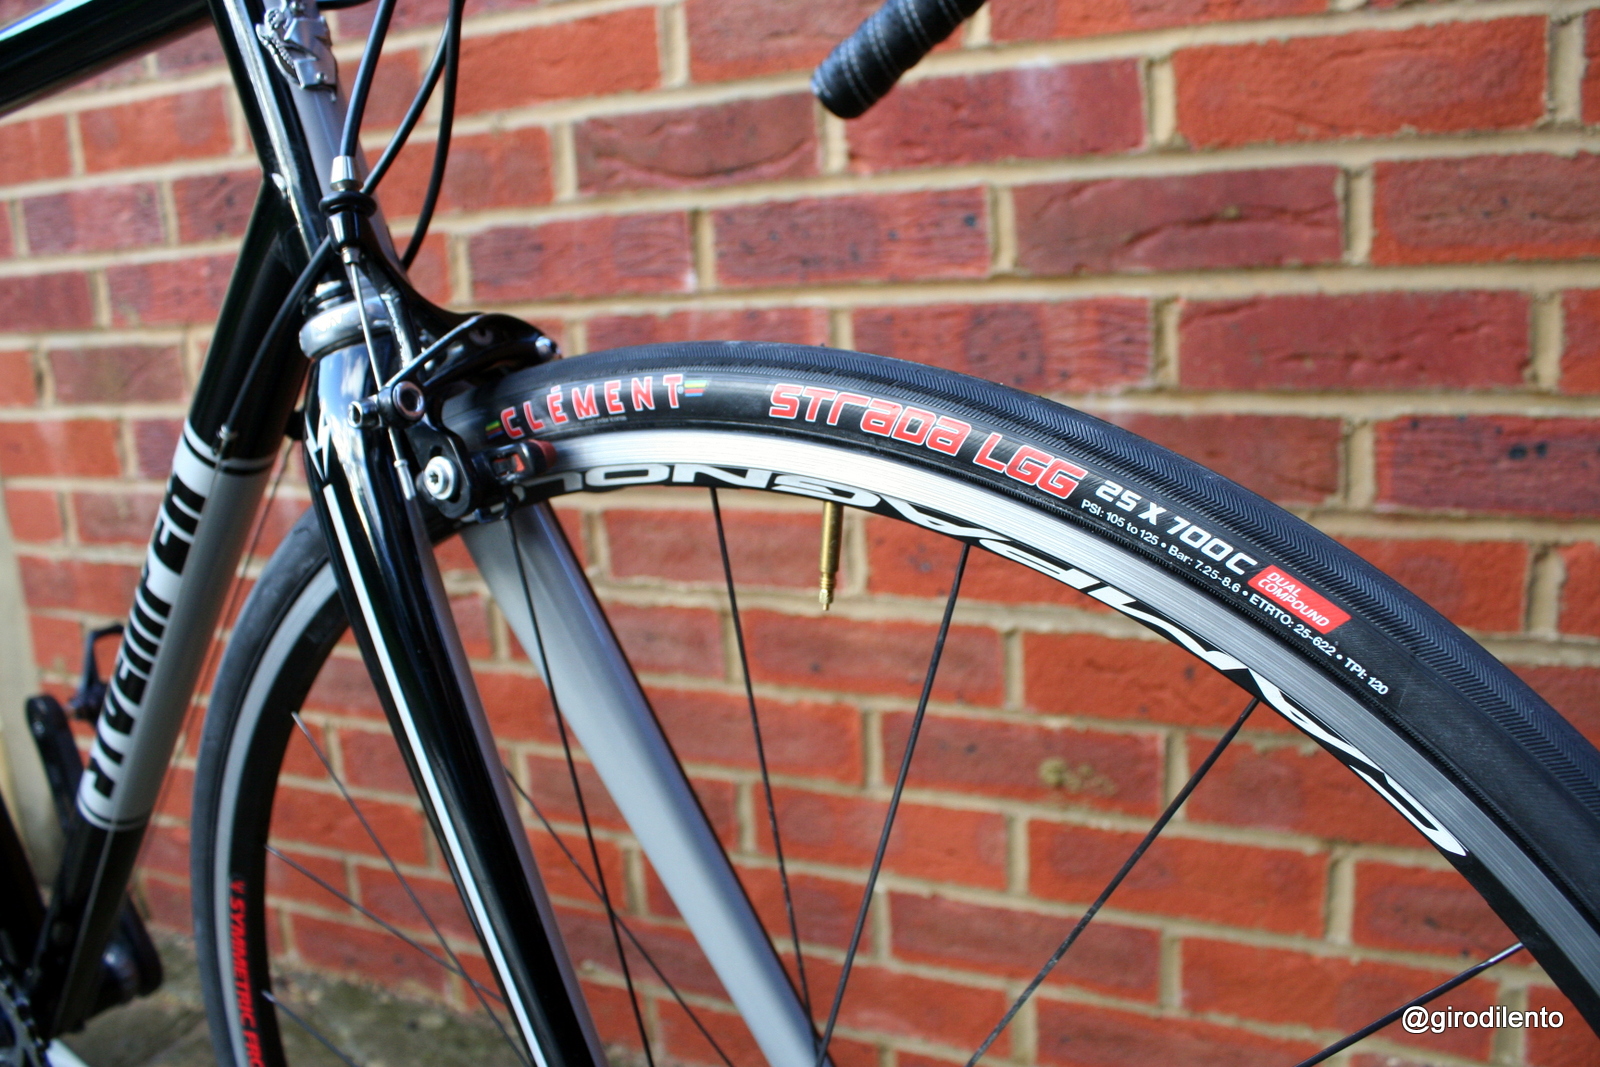 Clemént Strada LGG tyres on Campagnolo Neutron Ultra wheels - very classic